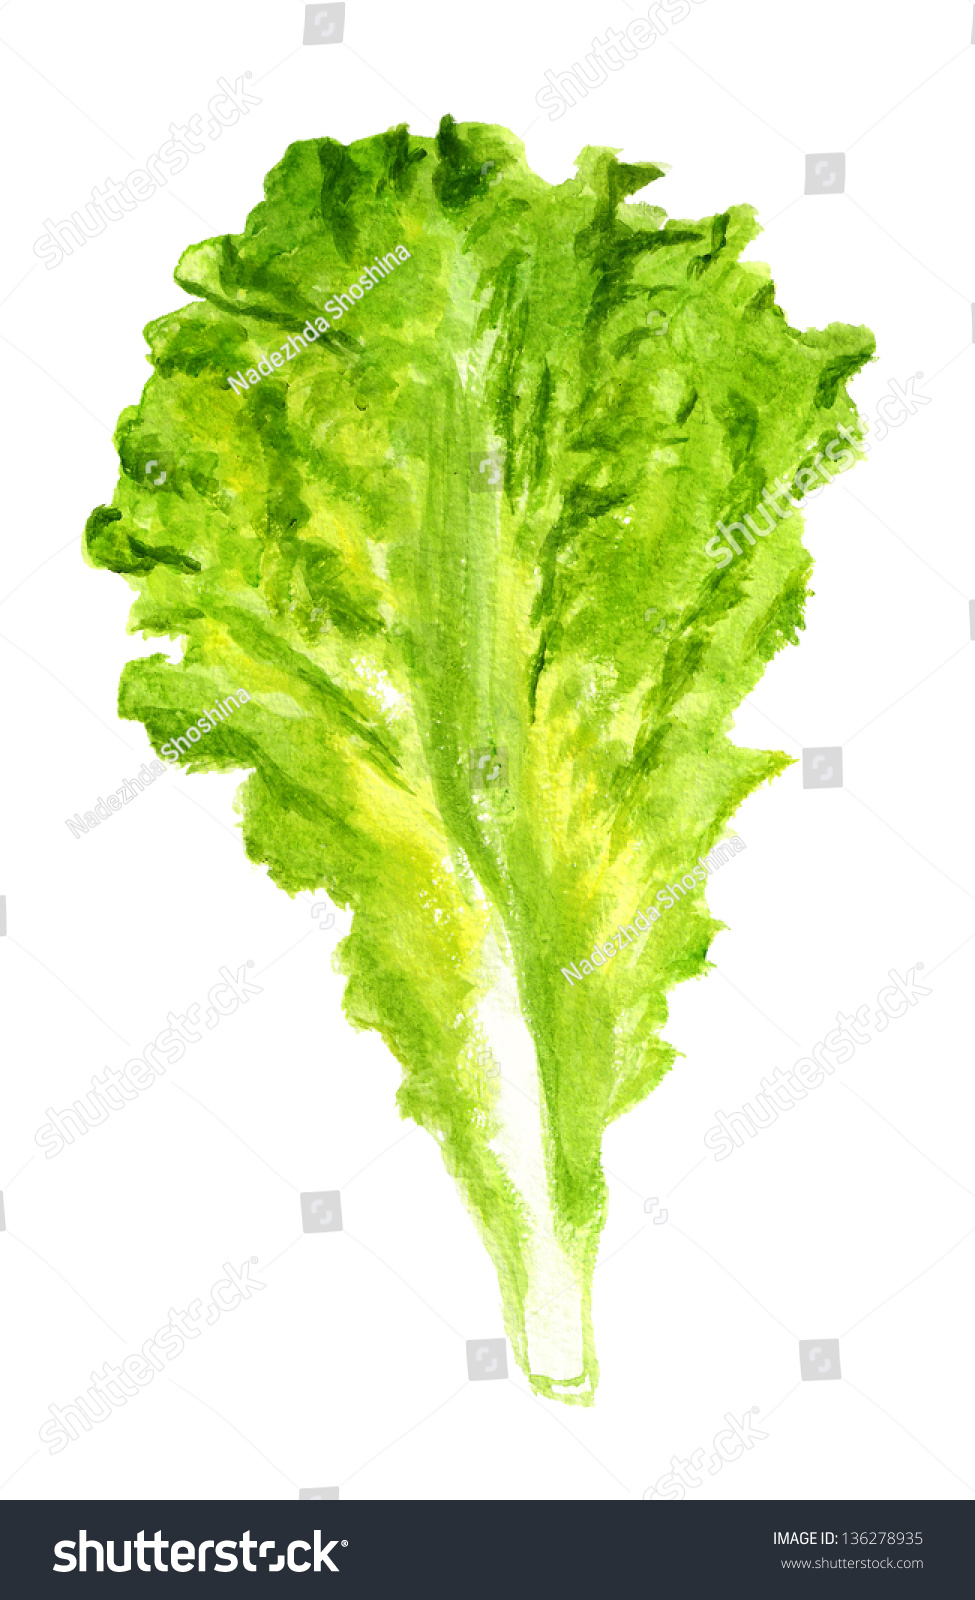 Watercolor image of green leaf of lettuce